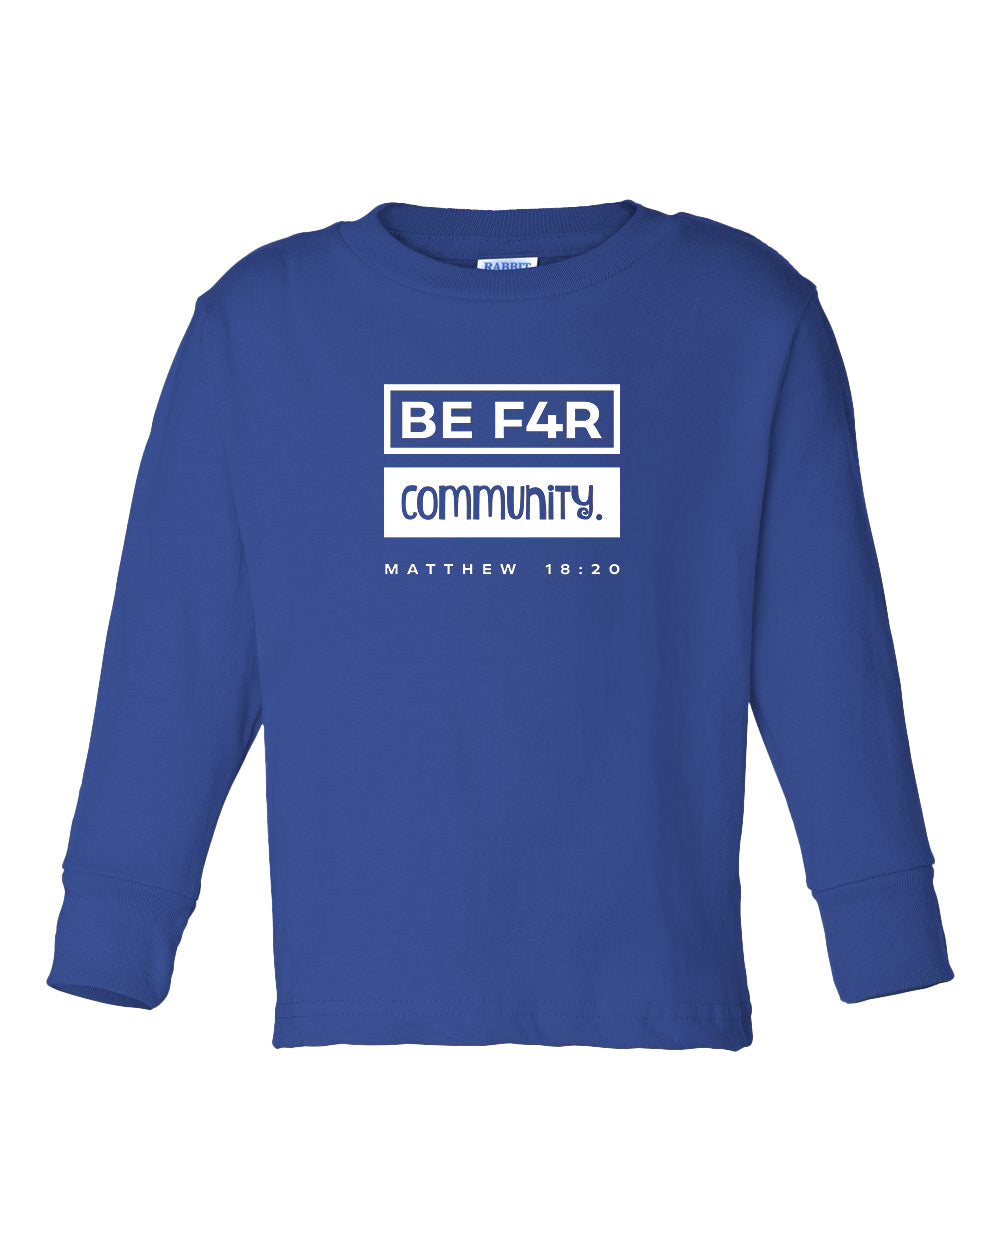 BE F4R Community 3 Toddler Long Sleeve